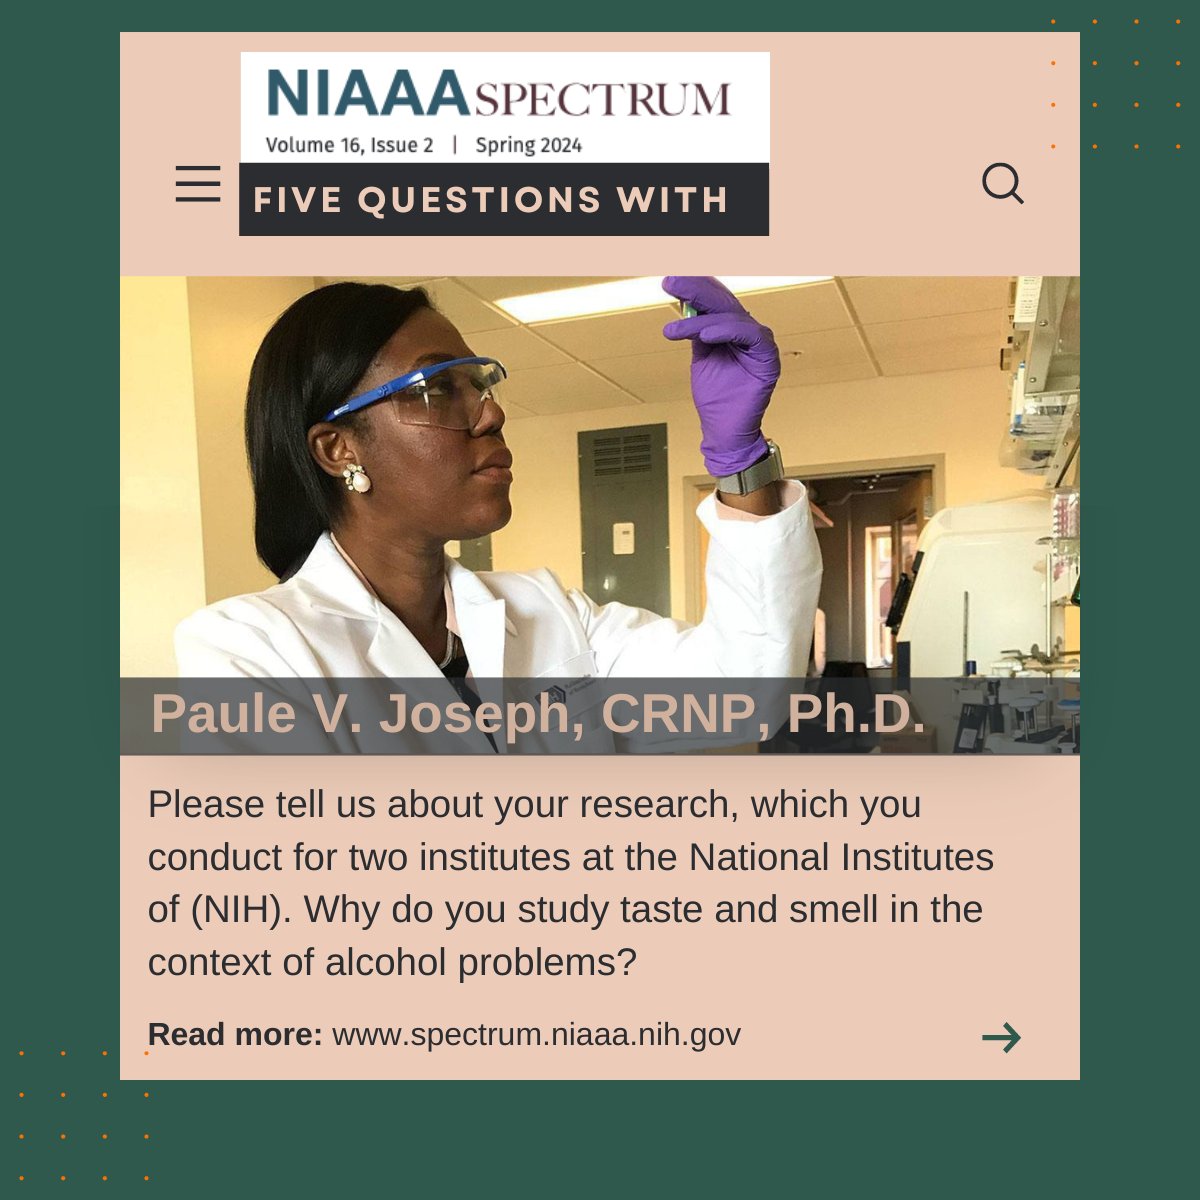 Discover how groundbreaking scientific research is transforming health outcomes—dive into our latest article written by #NIAAASpectrum. I invite you to read the full article here: spectrum.niaaa.nih.gov/spring2024five… #taste #smell #science #research